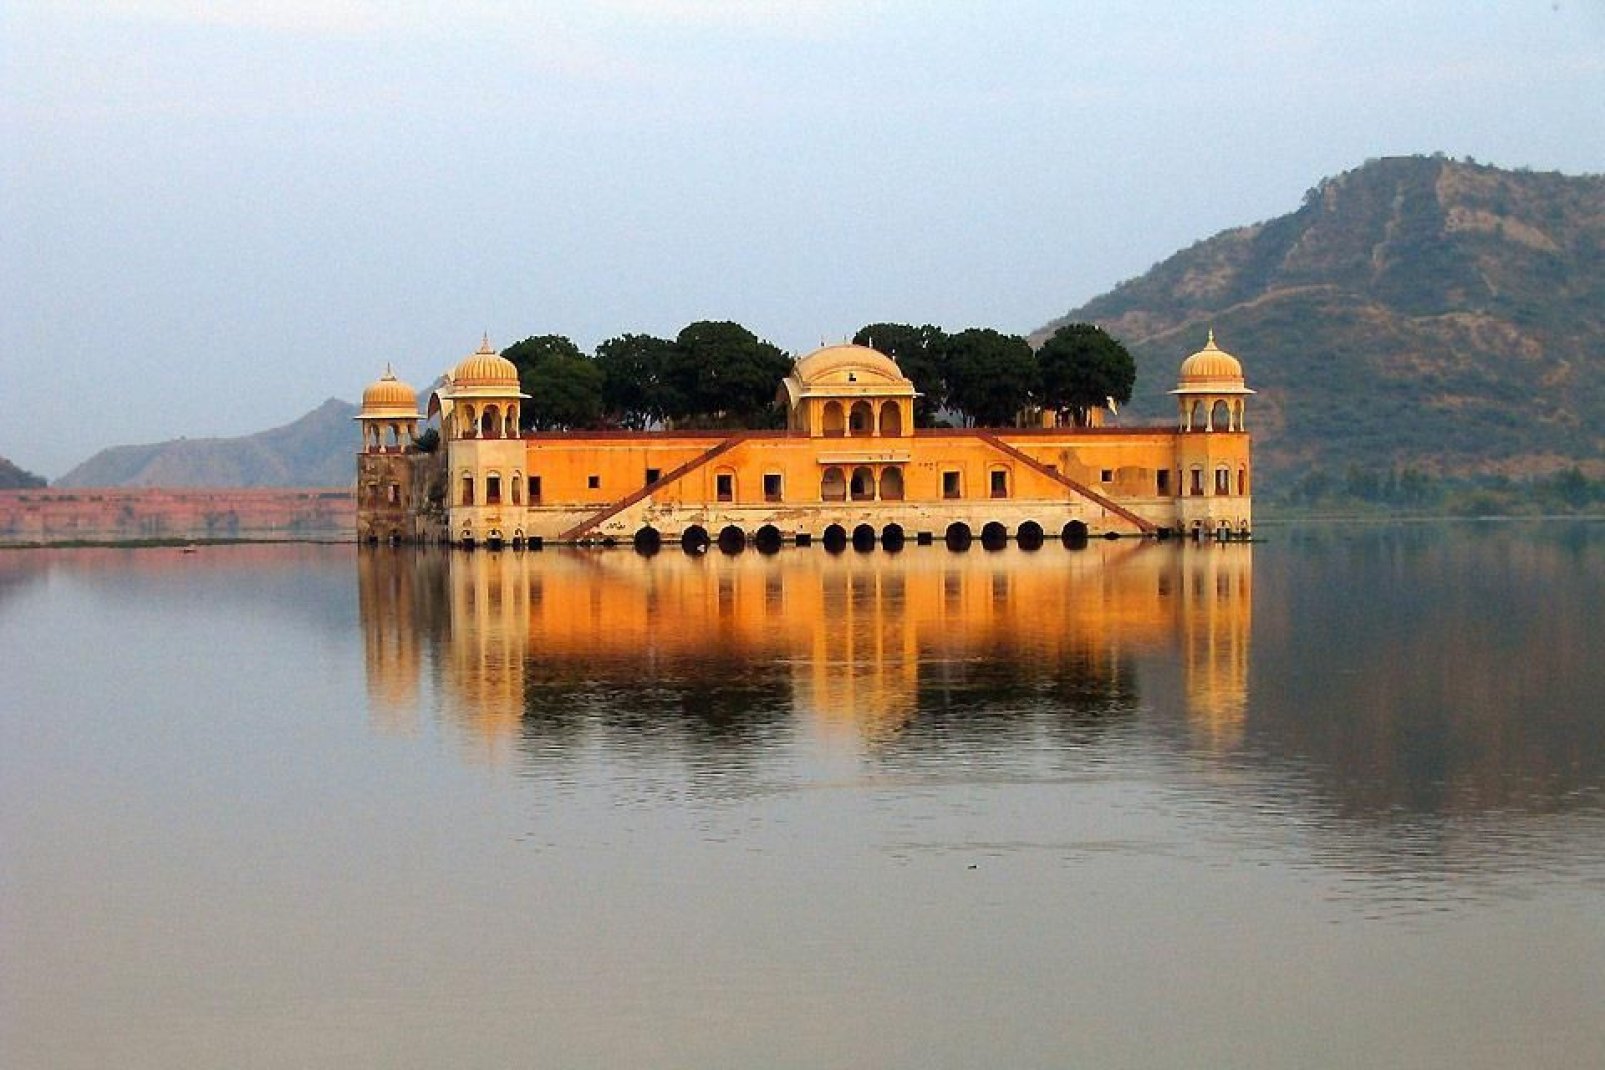 This palace was built in the middle of Man Sagar Lake in 1799; only the top five floors and the terrace can be seen above the water. It currently houses a museum.